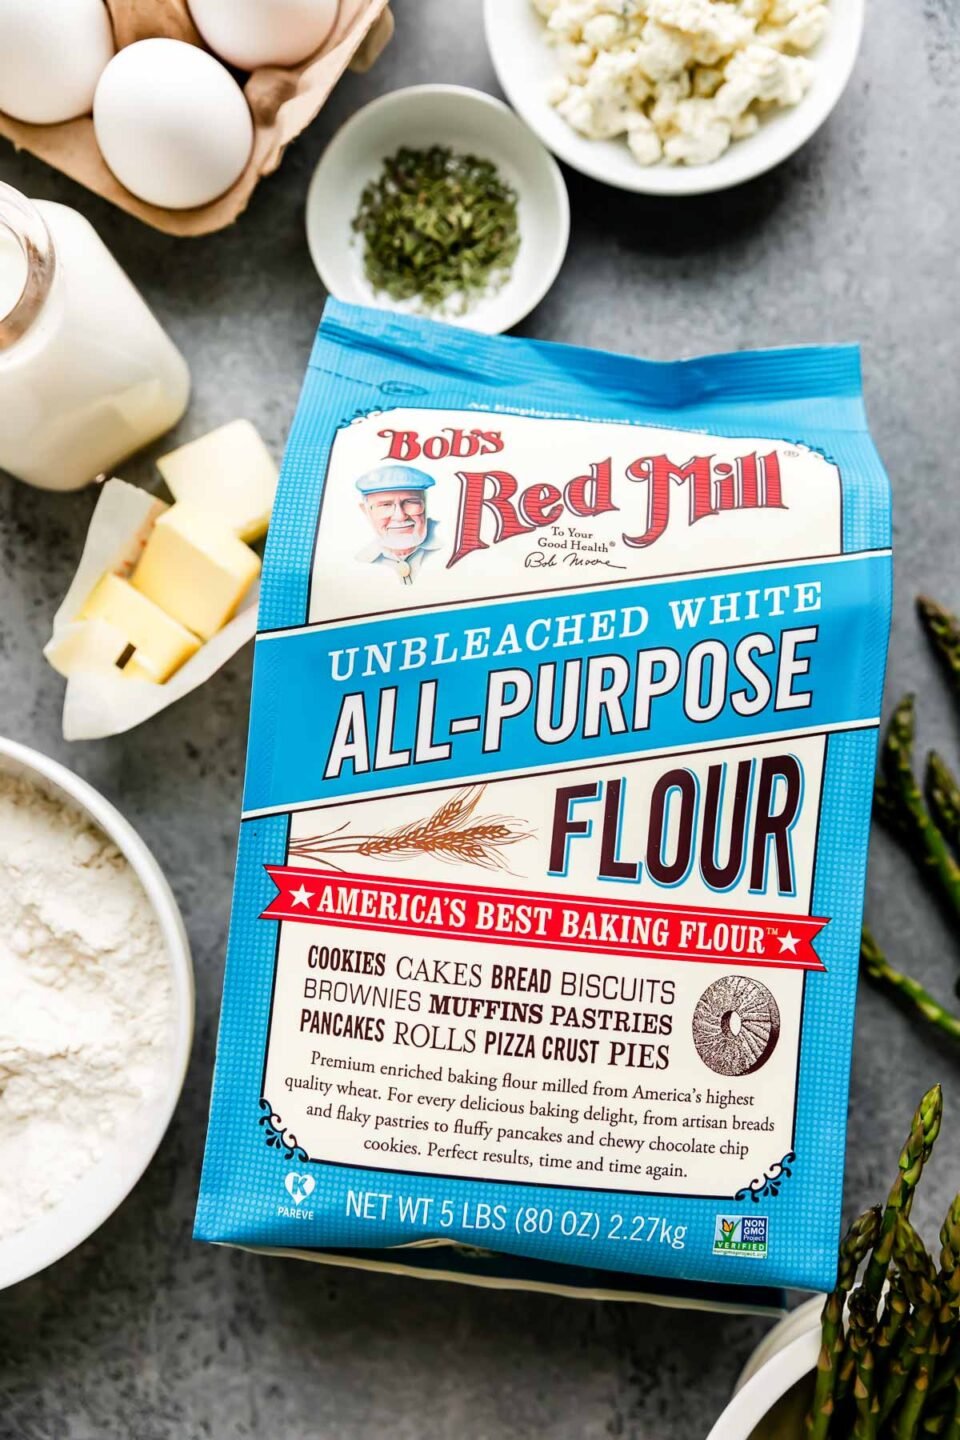 Bob's Red Mill Unbleached White All-Purpose Flour lays label side facing up atop a light gray textured surface surrounded by savory dutch baby ingredients: whole milk, eggs, Boursin cheese, unsalted butter, dried thyme, fresh asparagus, and a bowl of flour.